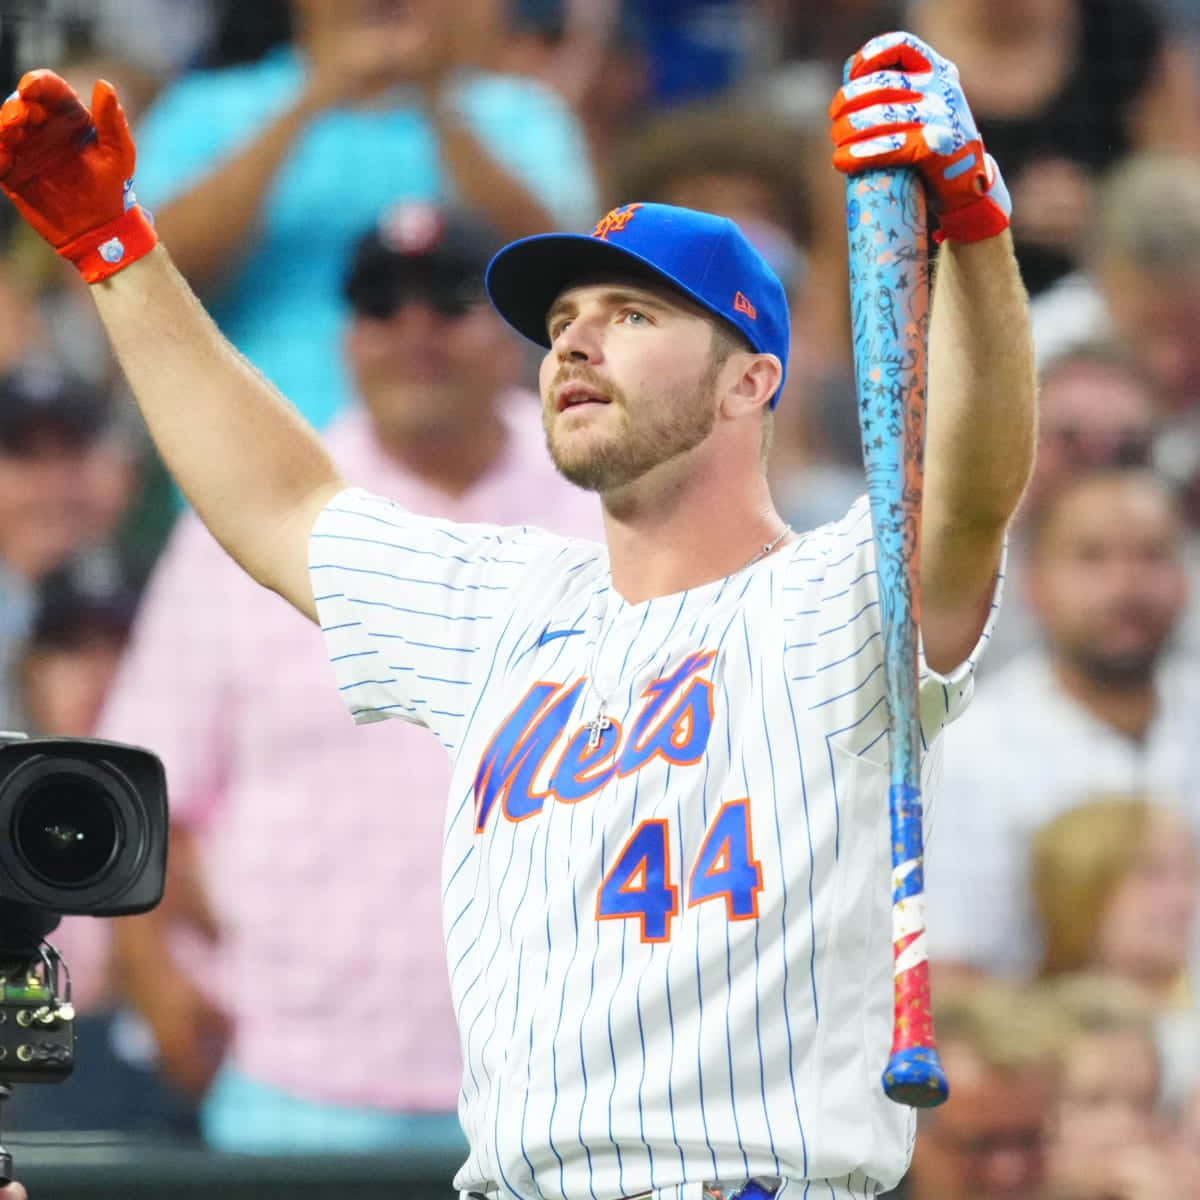 Pete Alonso smacks a double to deliver the win. Wallpaper